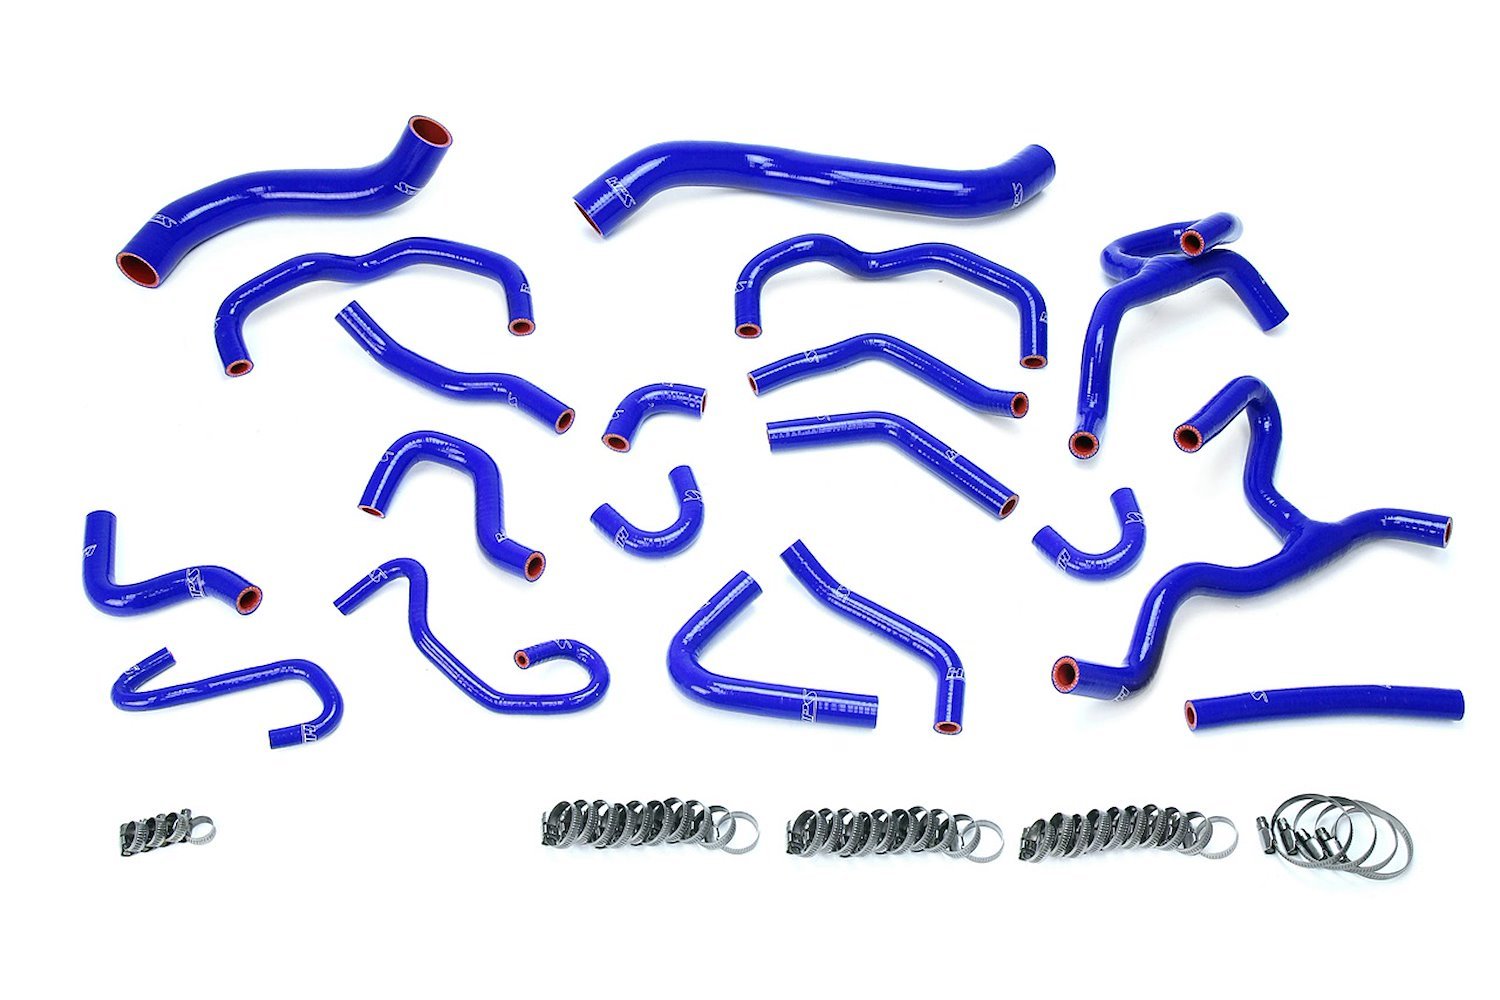 57-1709-BLUE Coolant Hose Kit, High-Temp 3-Ply Reinforced Silicone, Replace Rubber Radiator Heater Coolant Hoses